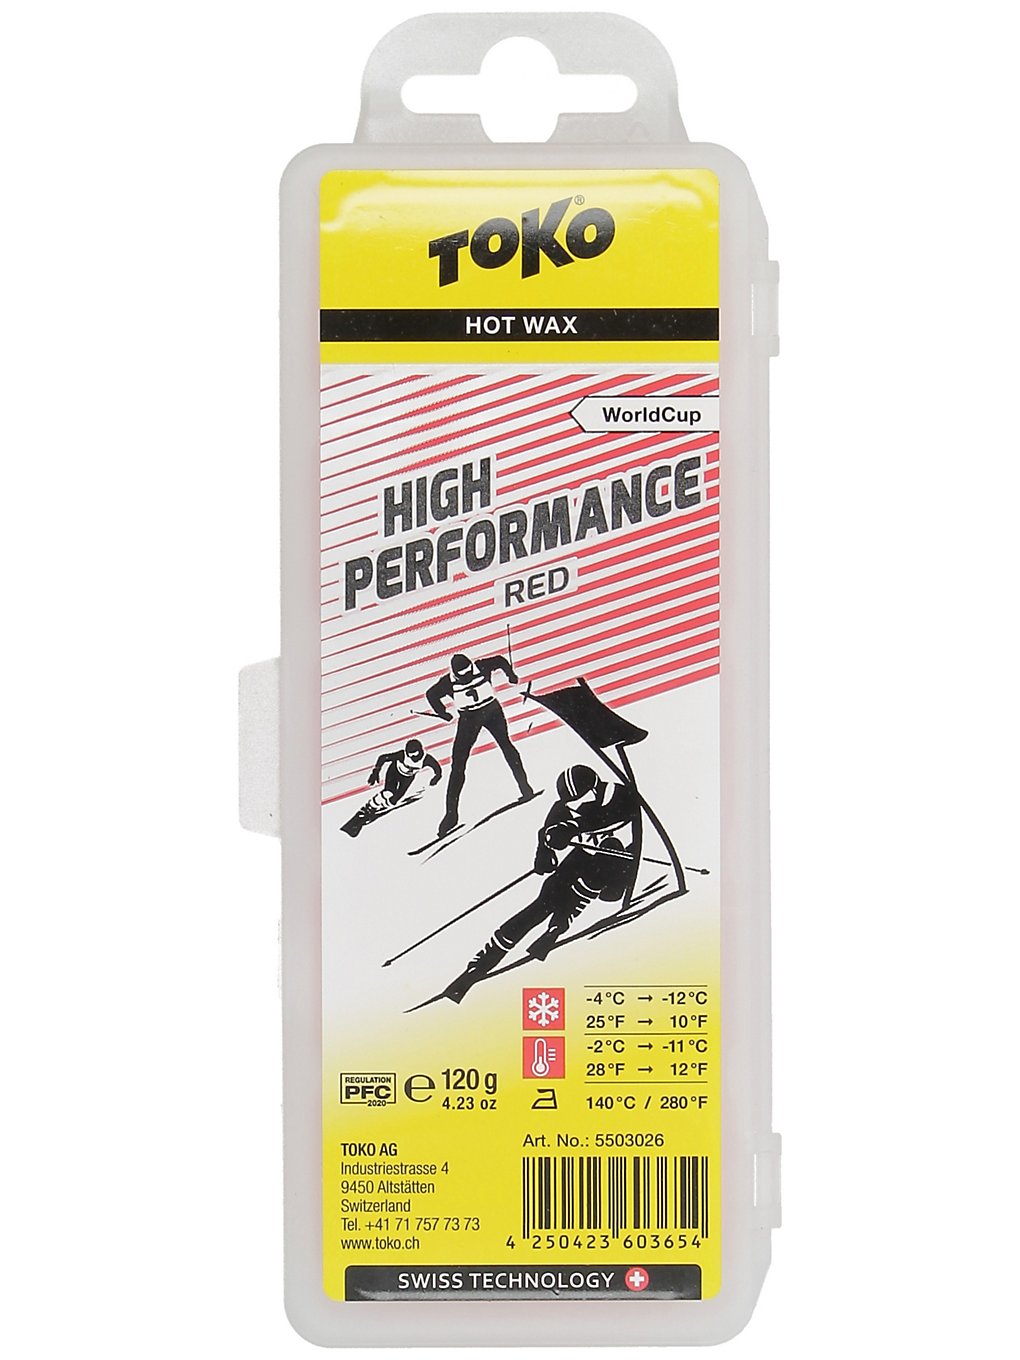 Toko High Performance Red -2°C / -11°C Wax rouge